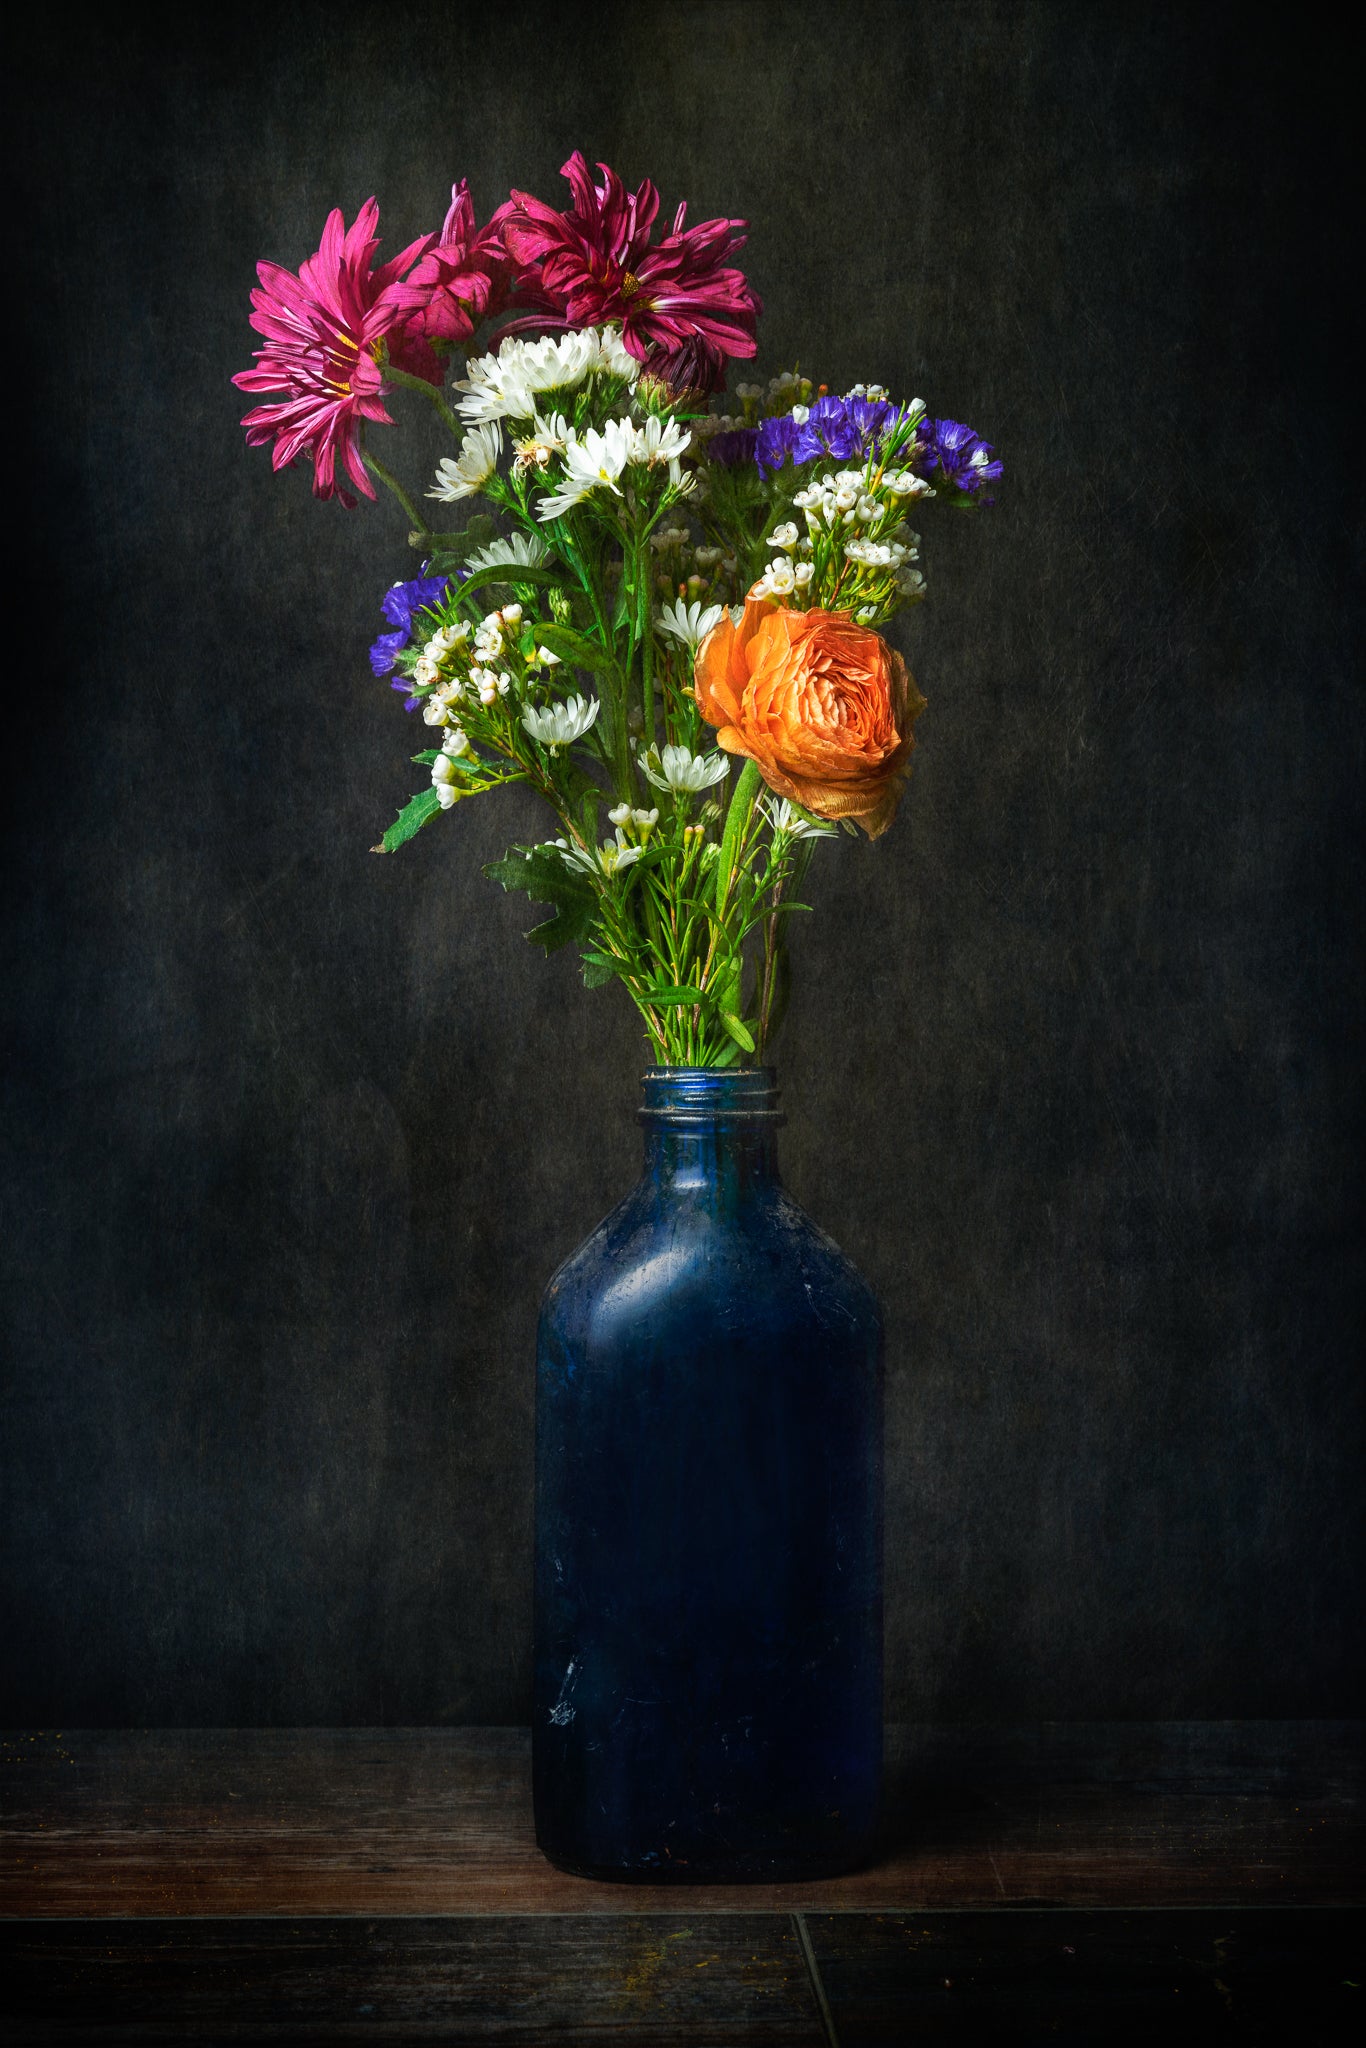 Fine art flower photograph of a bouquet of flowers in an old bottle titled "Tangy Resolve" by Cameron Dreaux of Dreaux Fine Art.